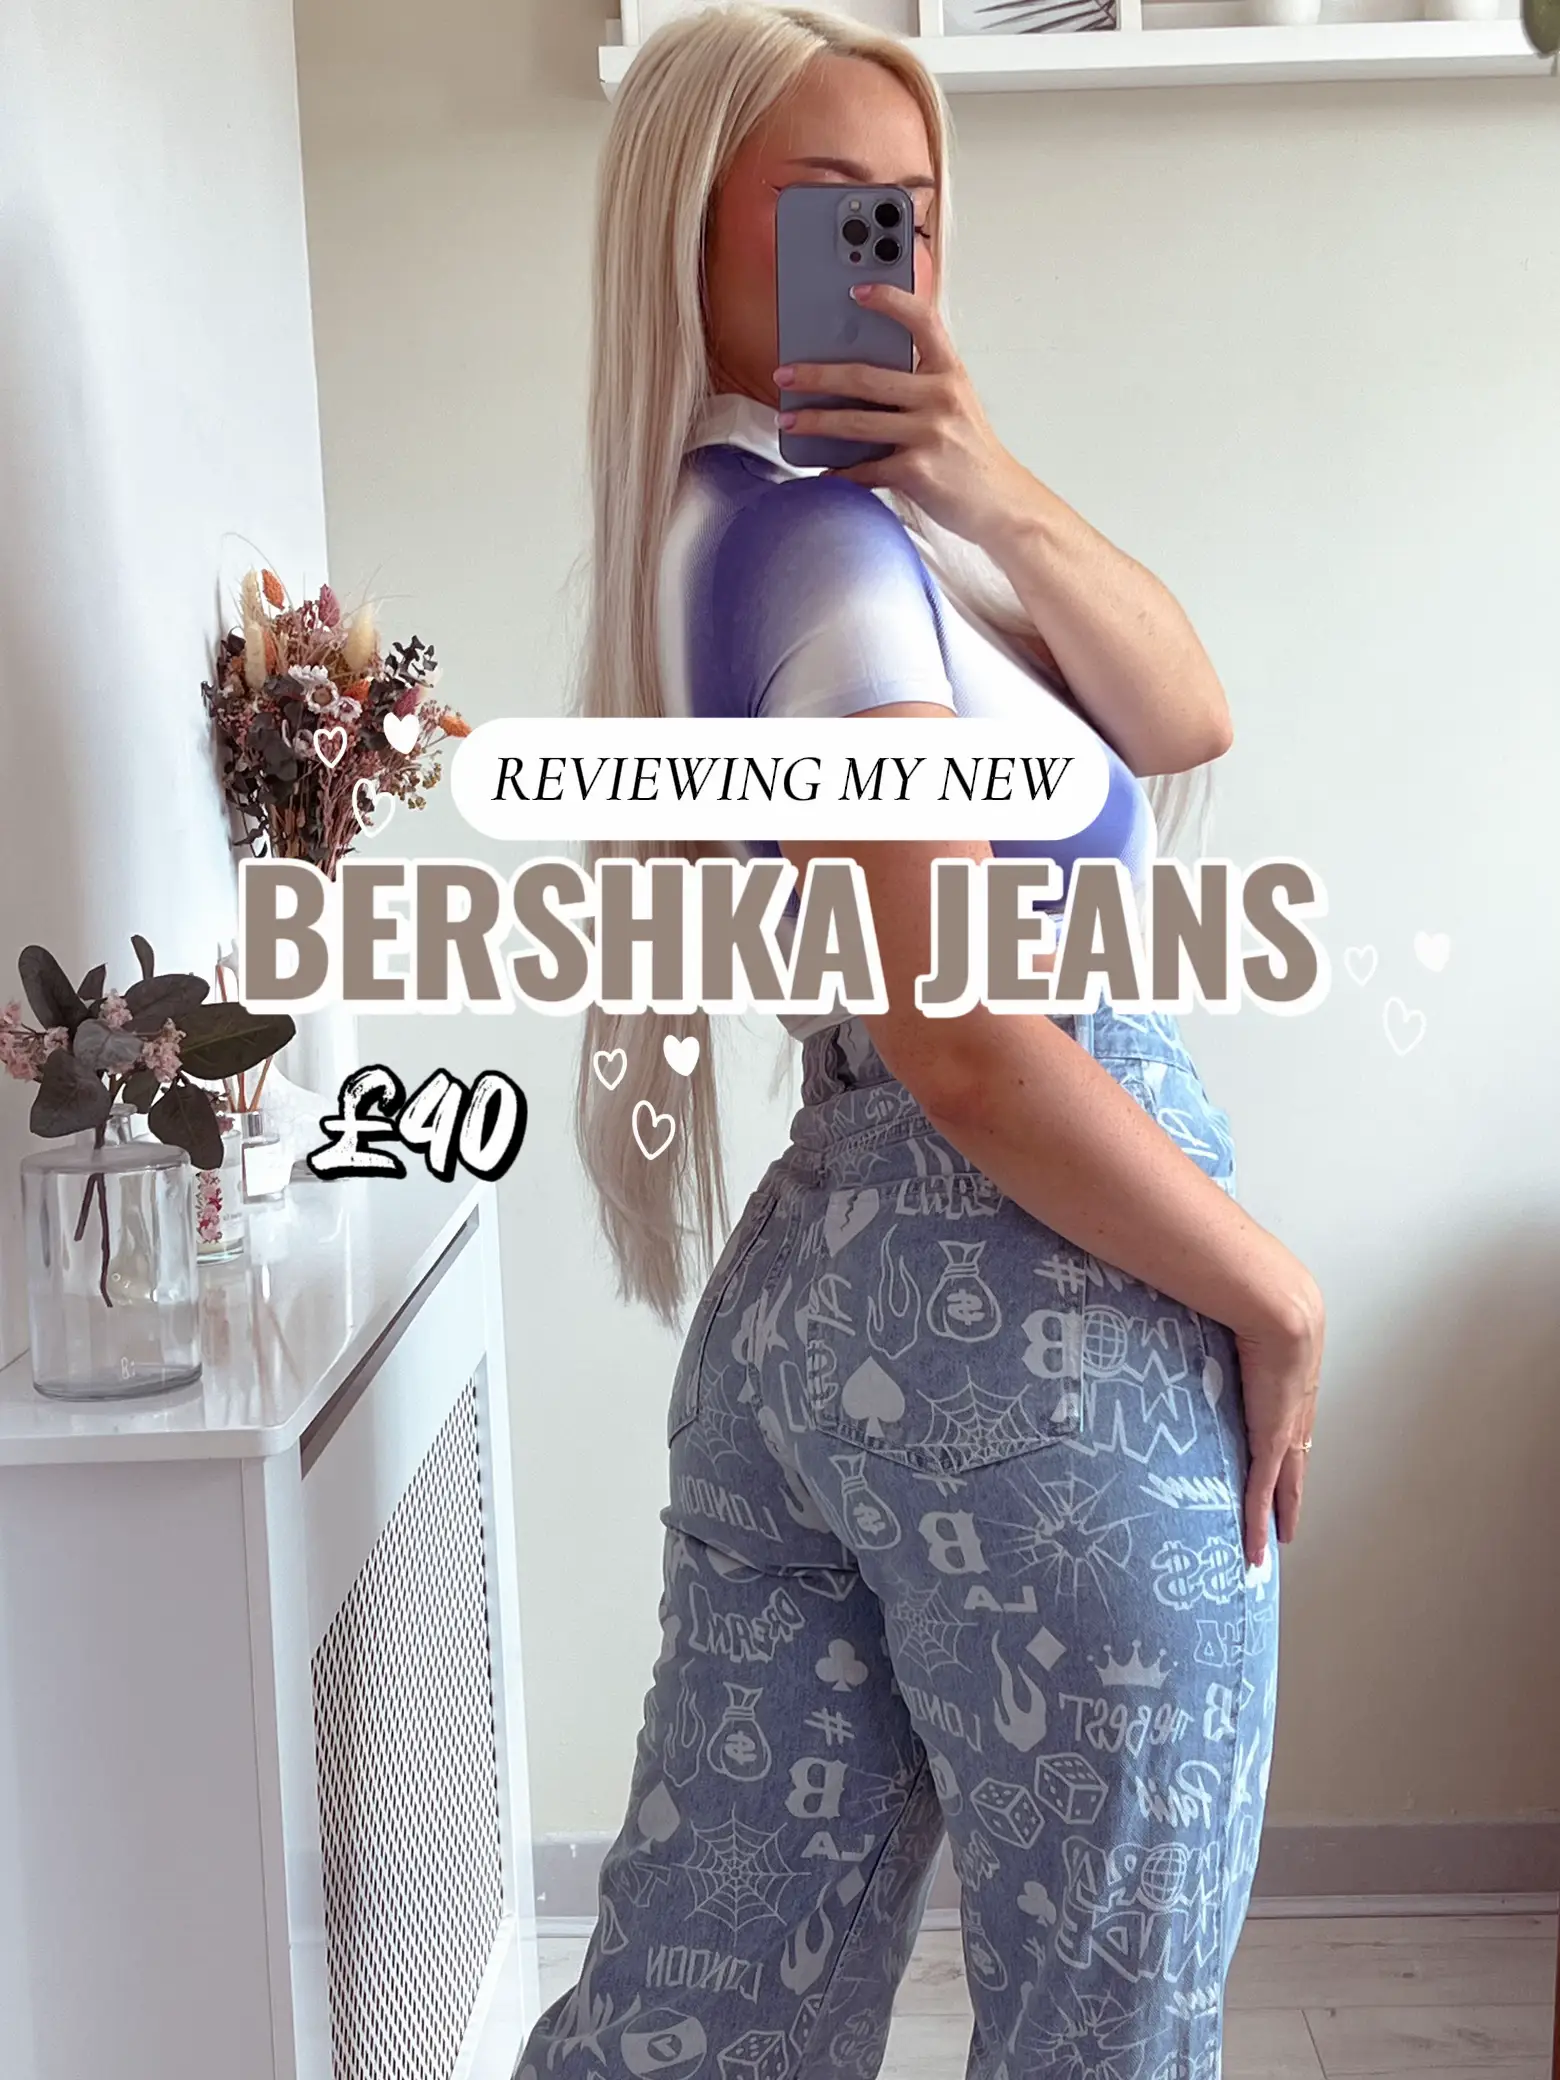 Trying the viral Bershka dress!!, Gallery posted by Mia Everett